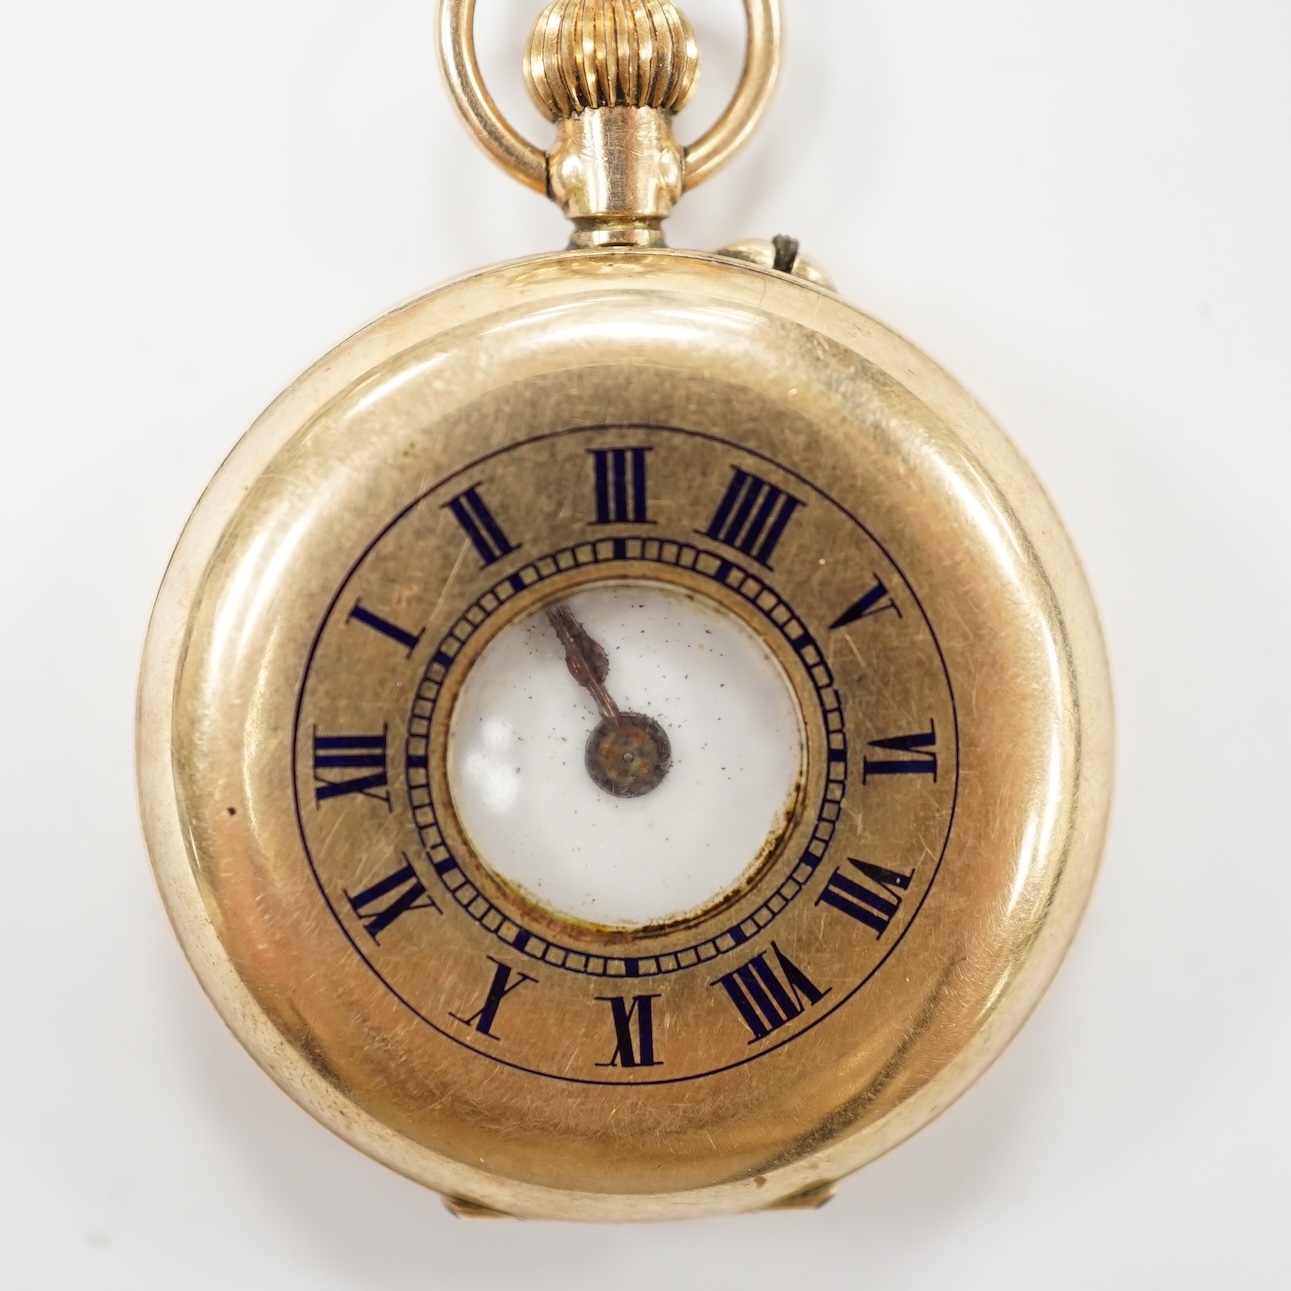 An Edwardian 12ct gold half hunter fob watch, with Arabic dial and Roman chapter ring, gross weight 20.8 grams. Condition - poor